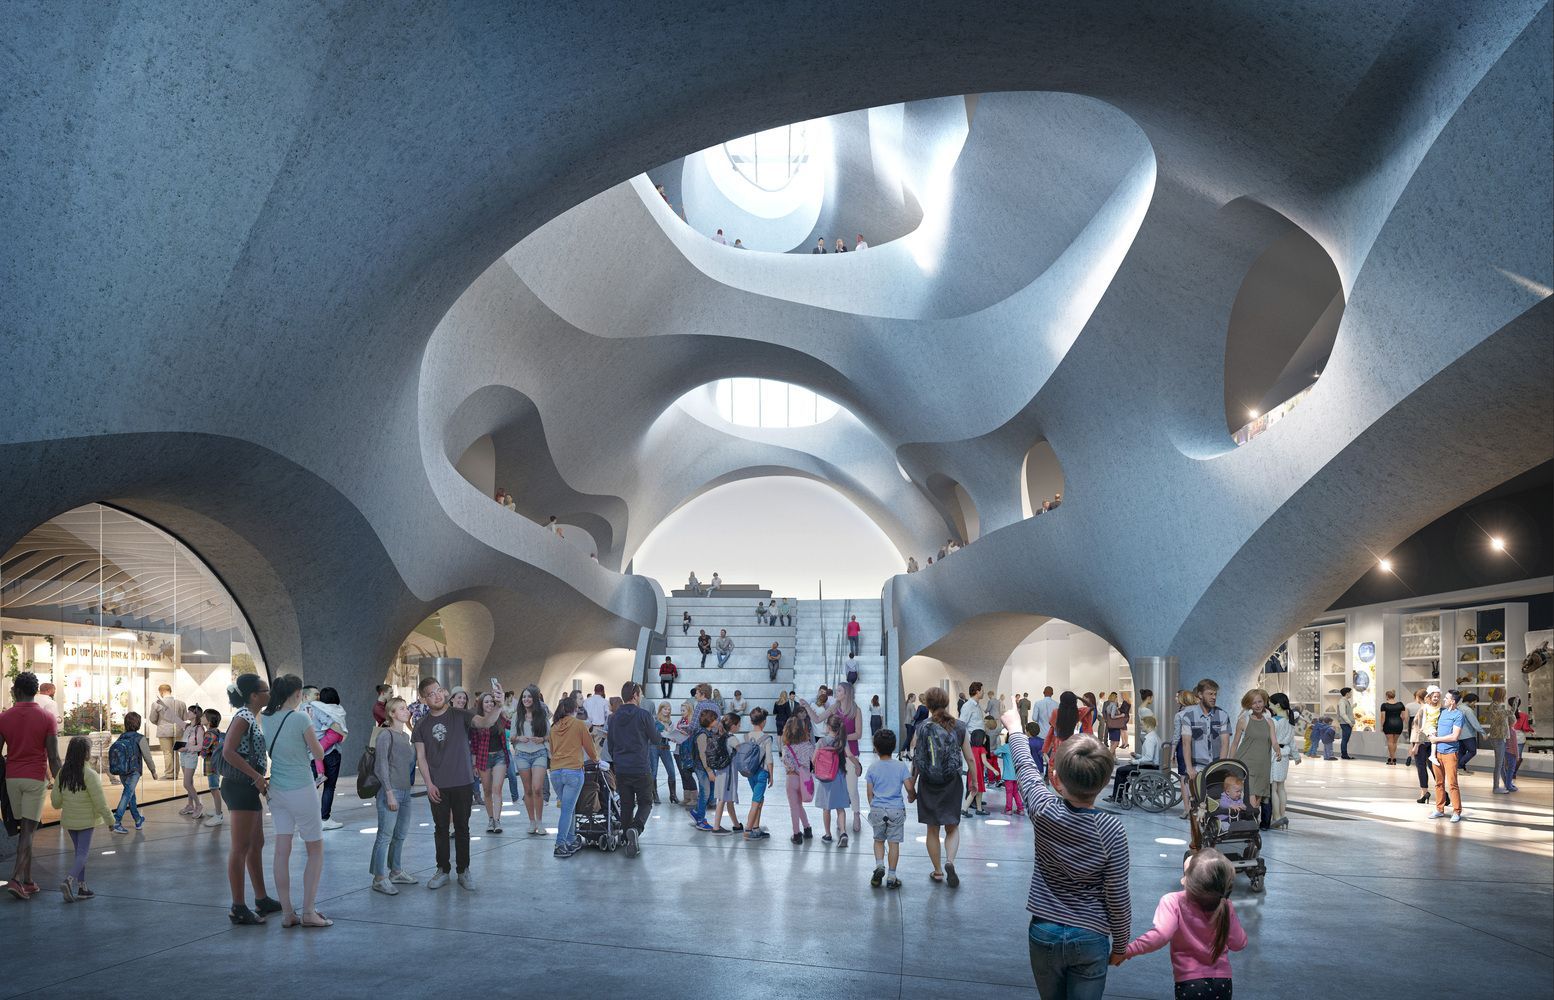 The architectural projects we are most looking forward to in 2023